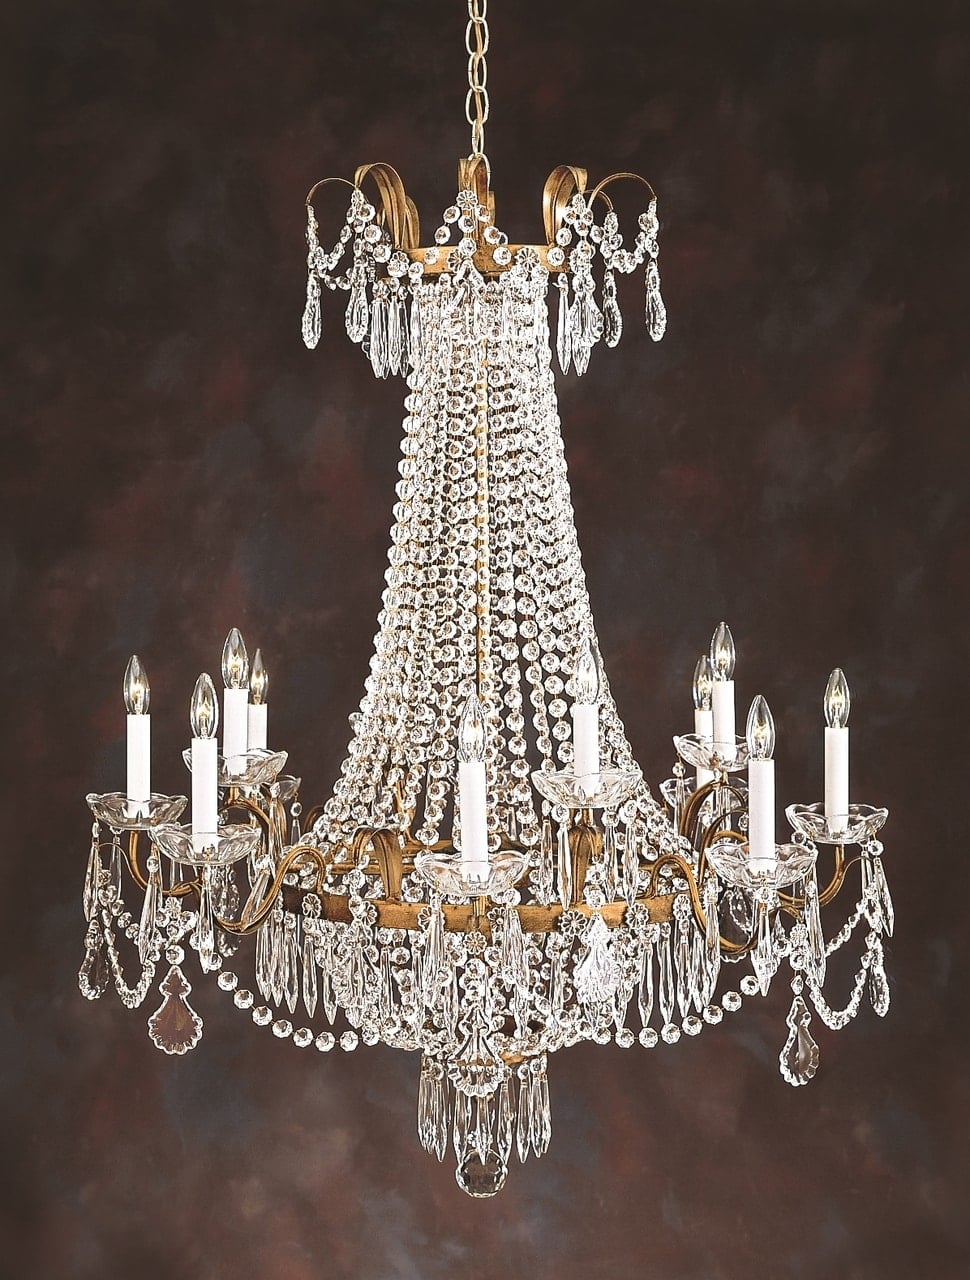 products-affinito-crystal-chandelier_7769__09292.1500996459.1280.1280